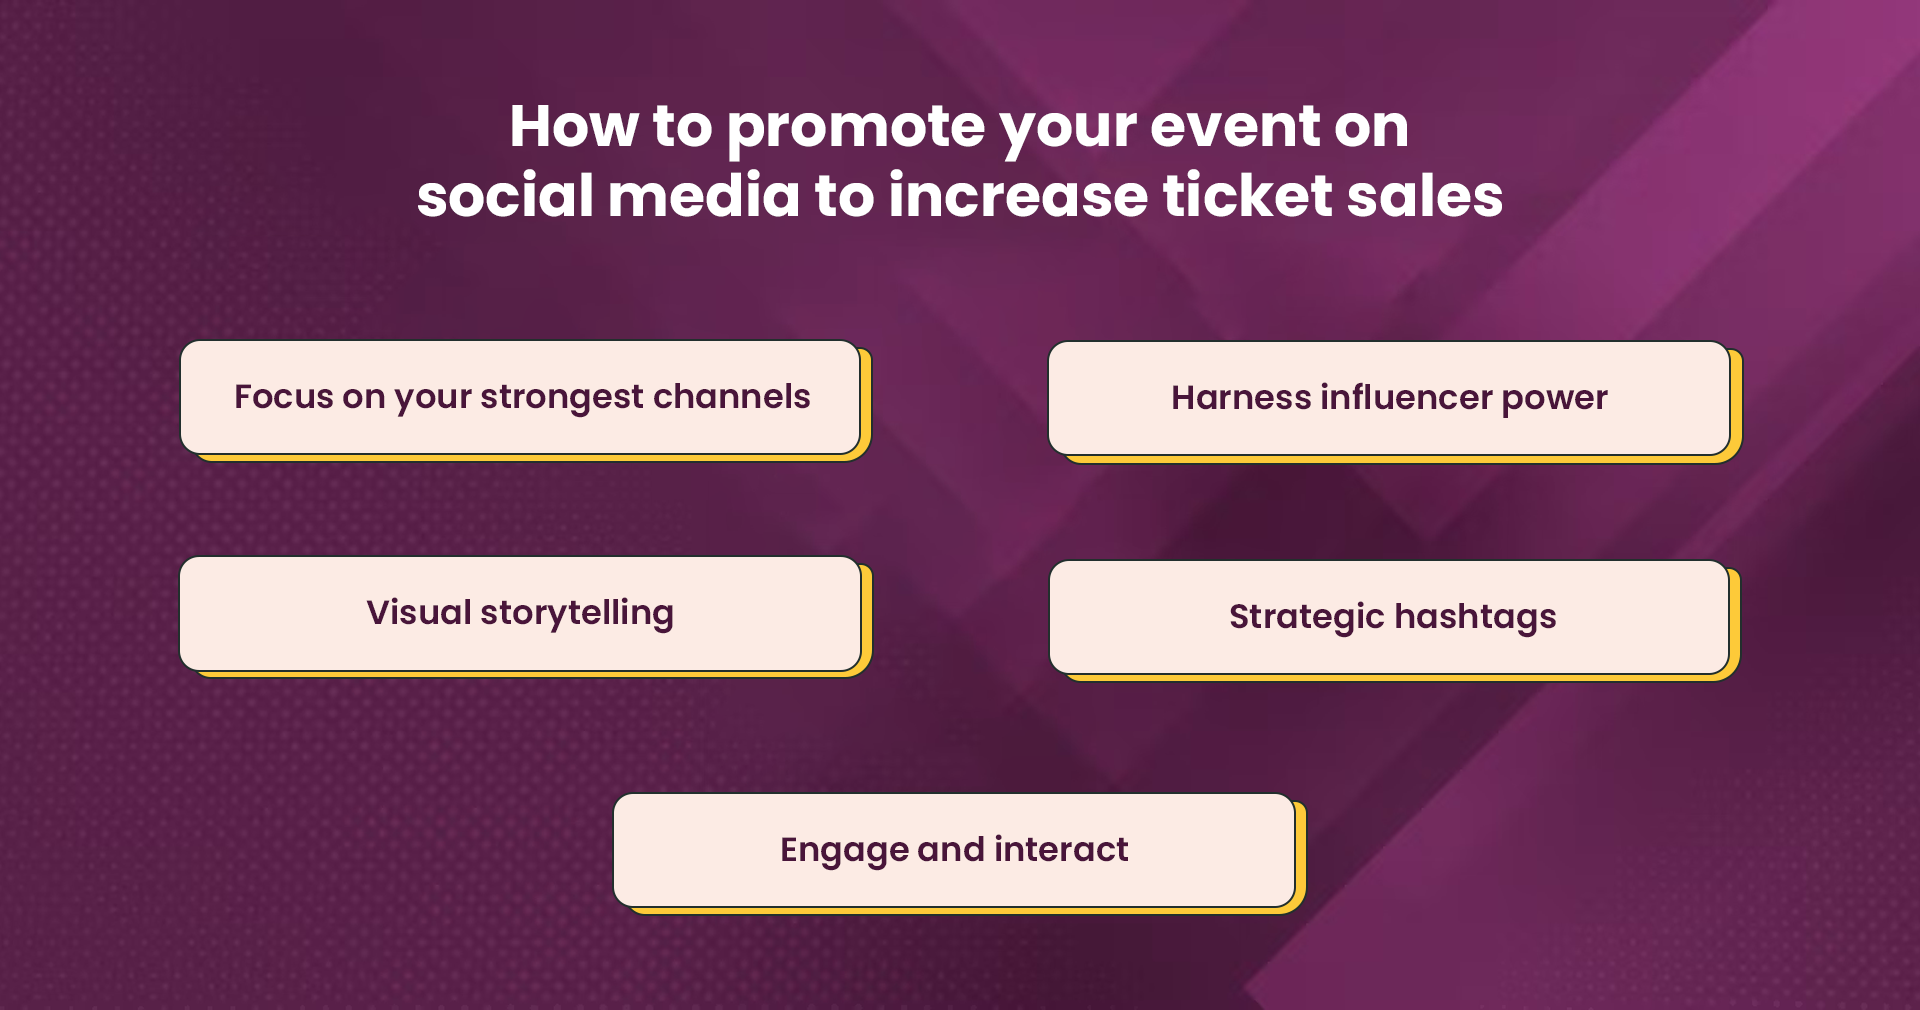 Tips to promote your event on social media